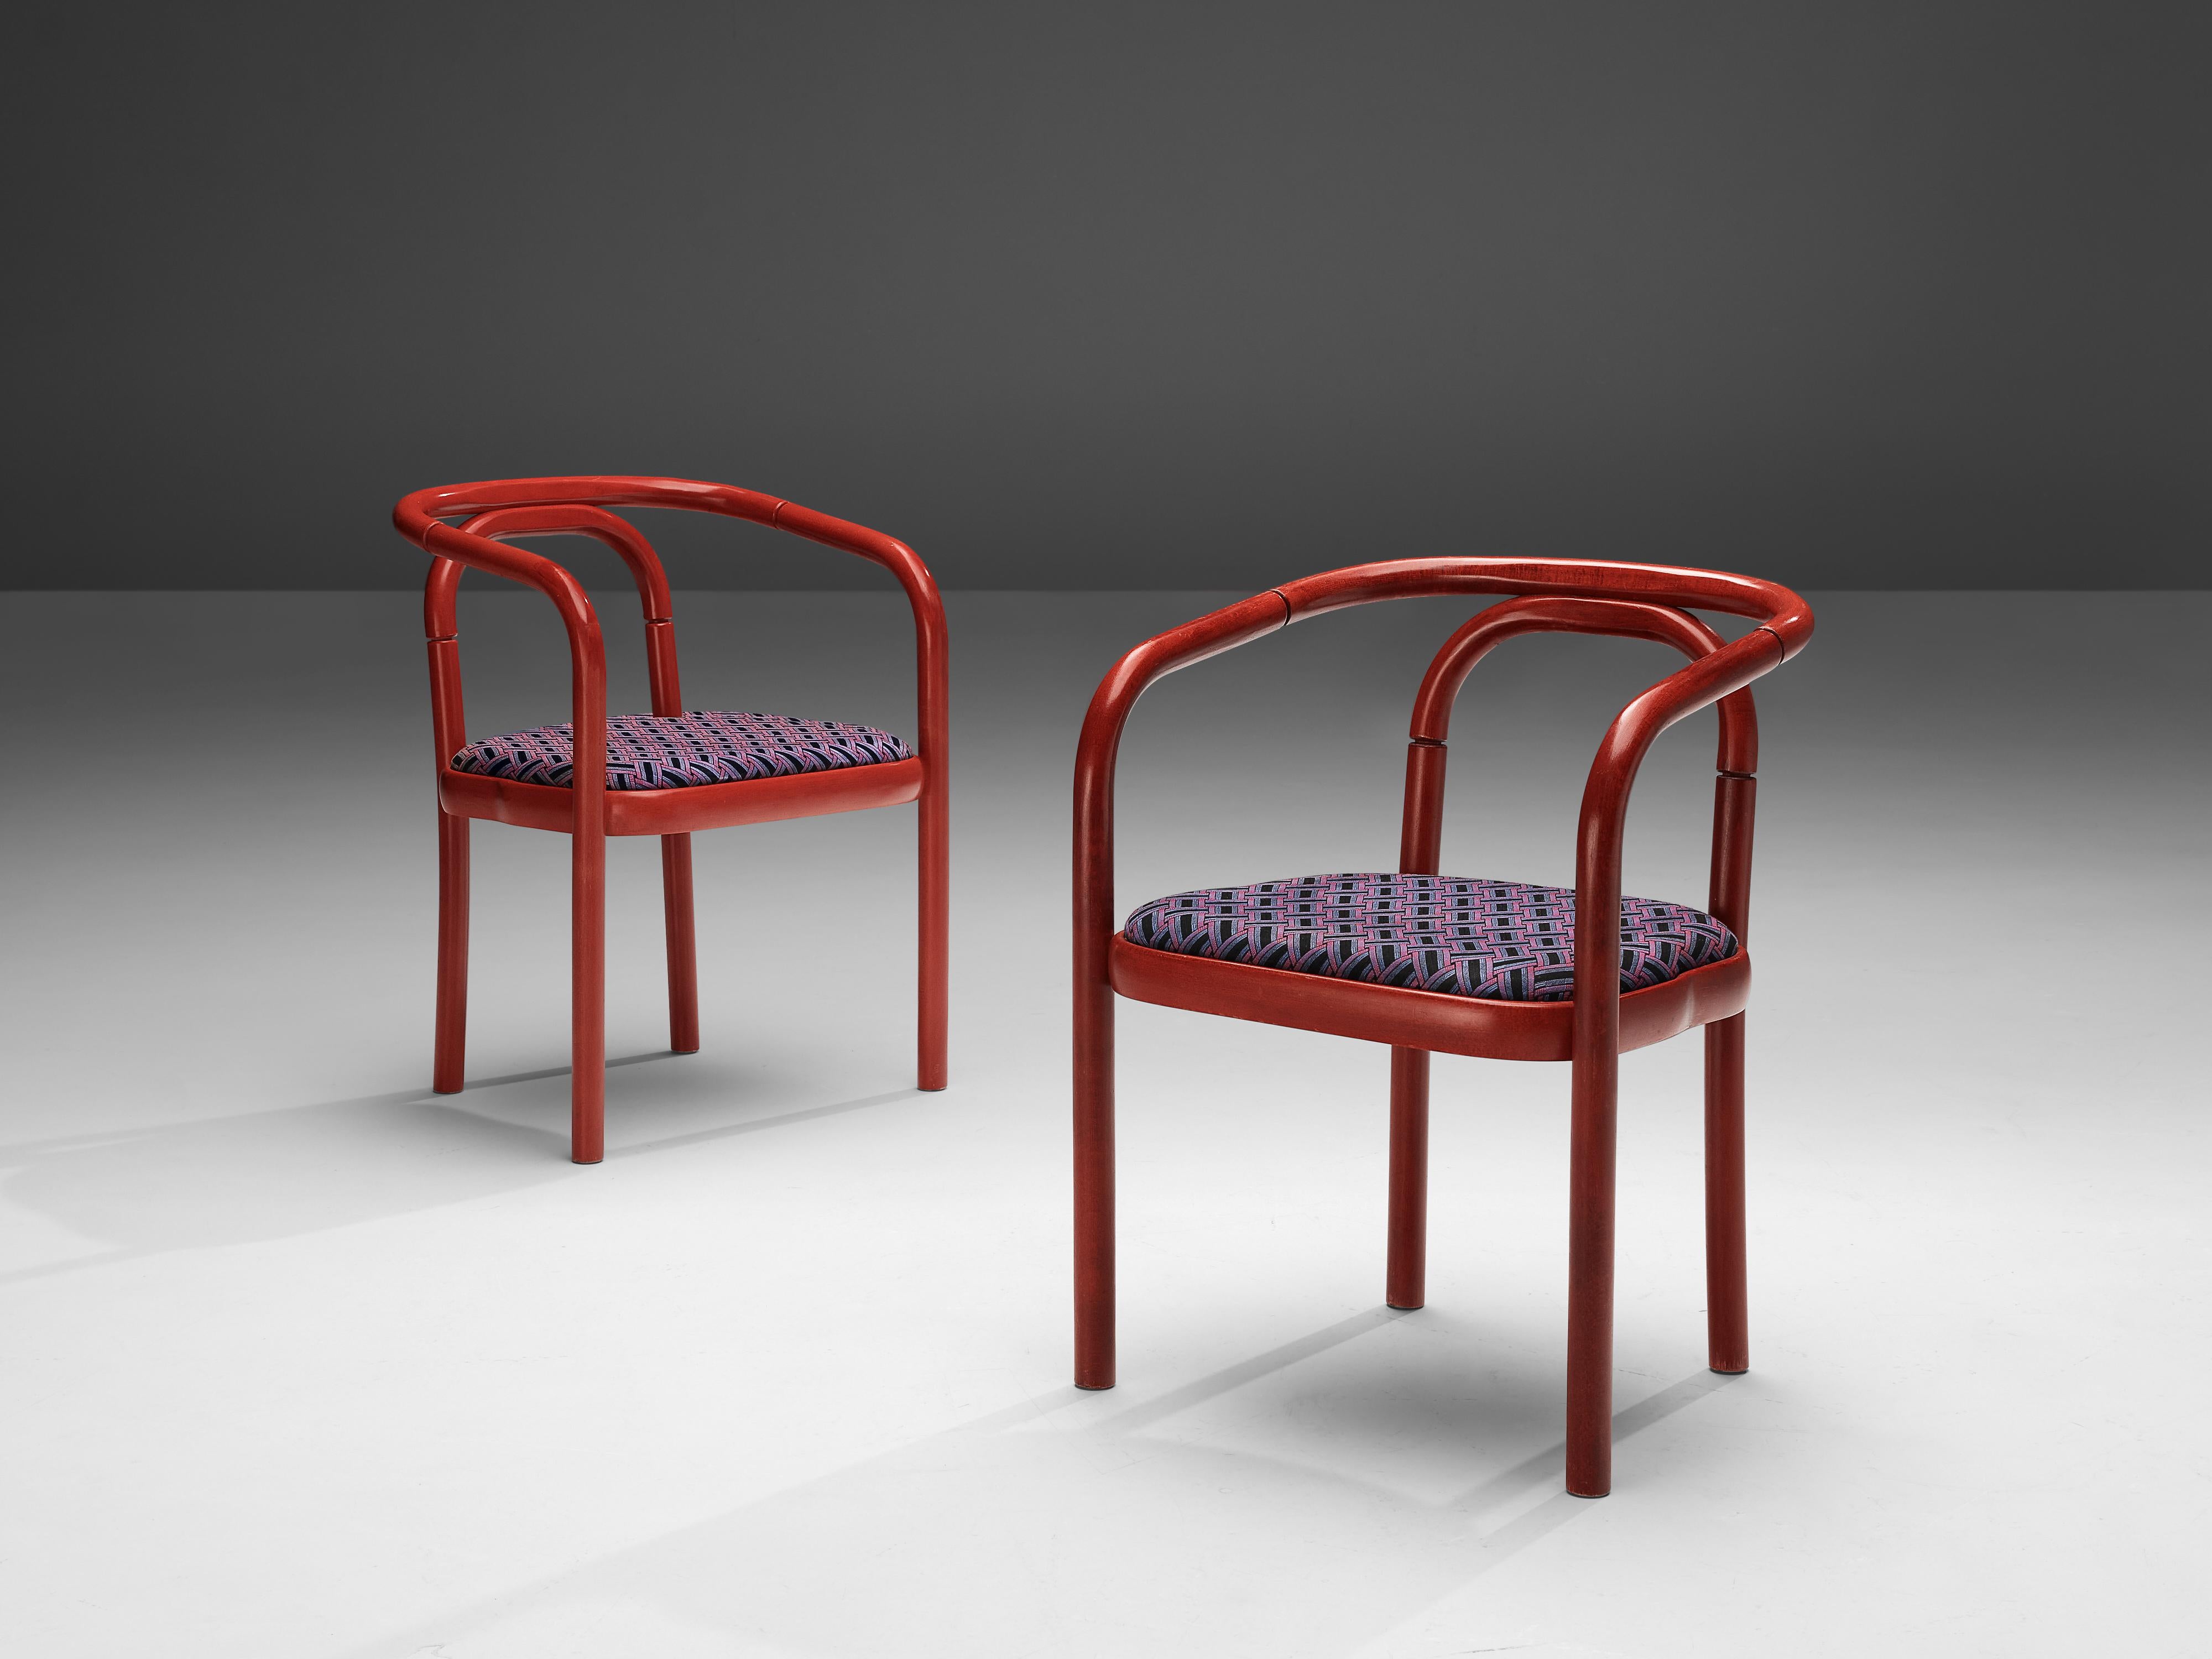 Antonin Suman for Ton, armchairs model E4309, lacquered beech, fabric, Czech Republic, 1977

These dining chairs are manufactured by Ton. The chair features a wonderful bentwood frame that is colored in an eye-catching red tone. Engraved rings add a